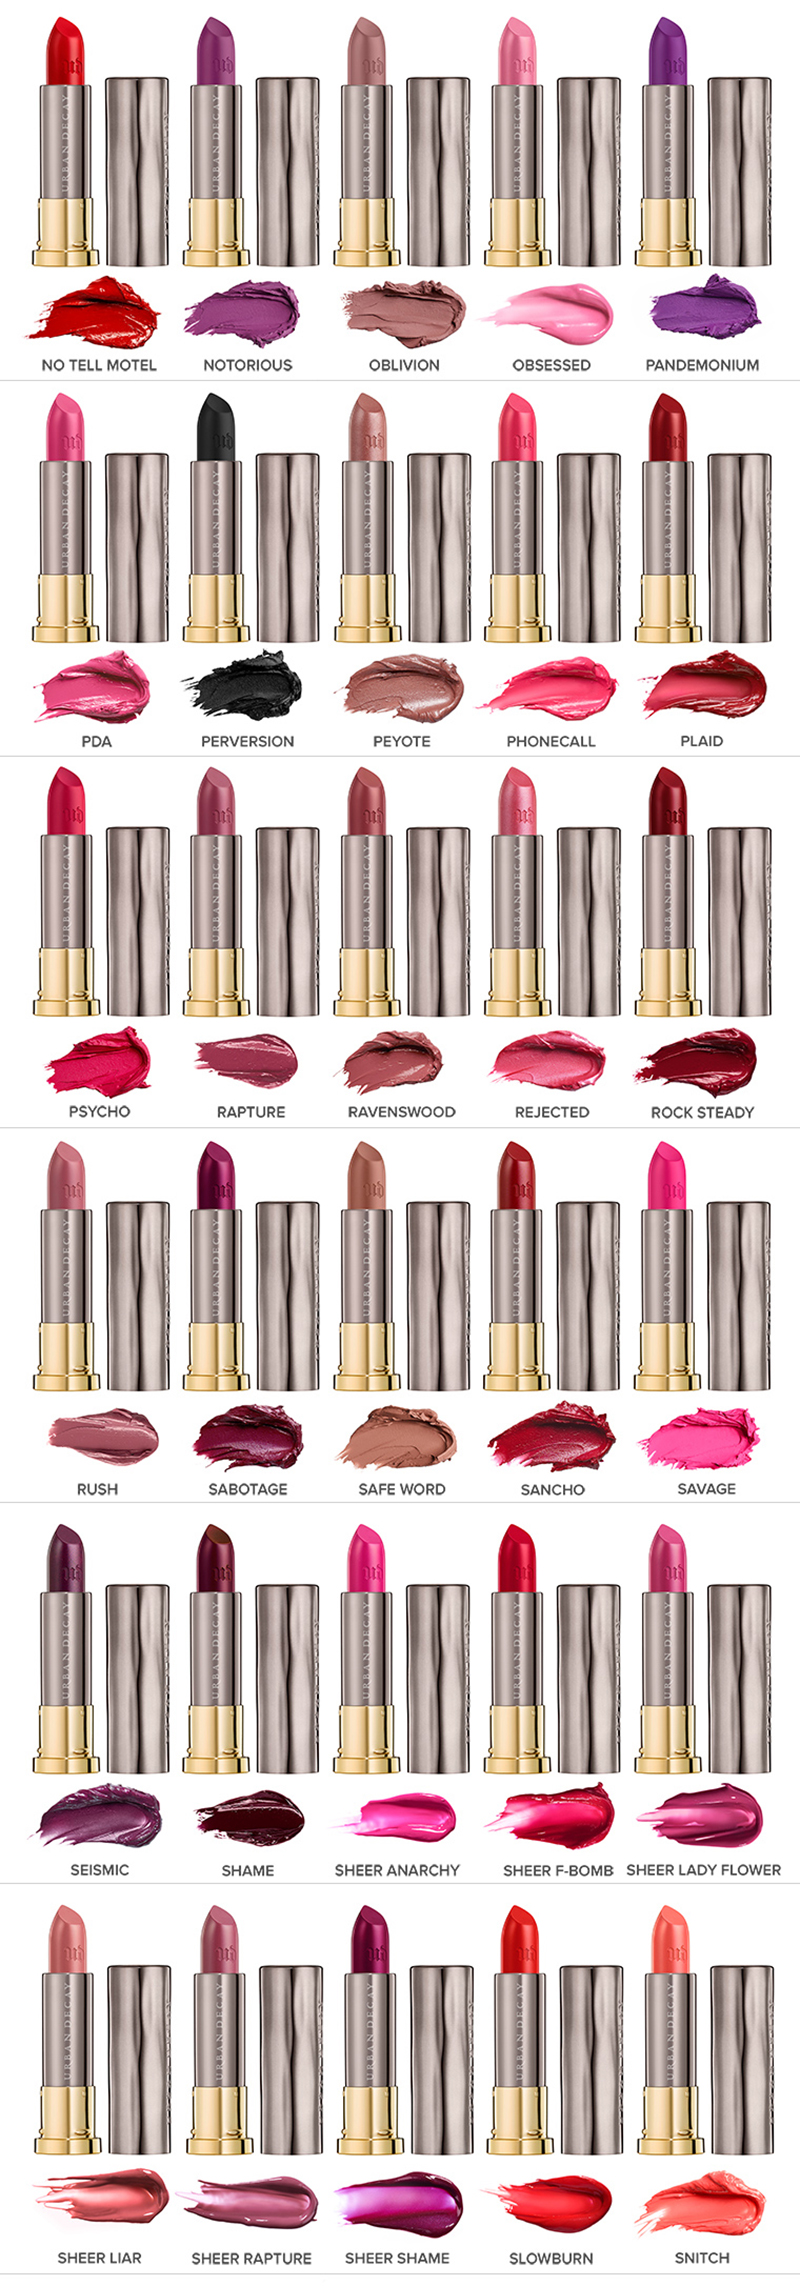 stylelab-beauty-blog-urban-decay-vice-lipstick-collection-4